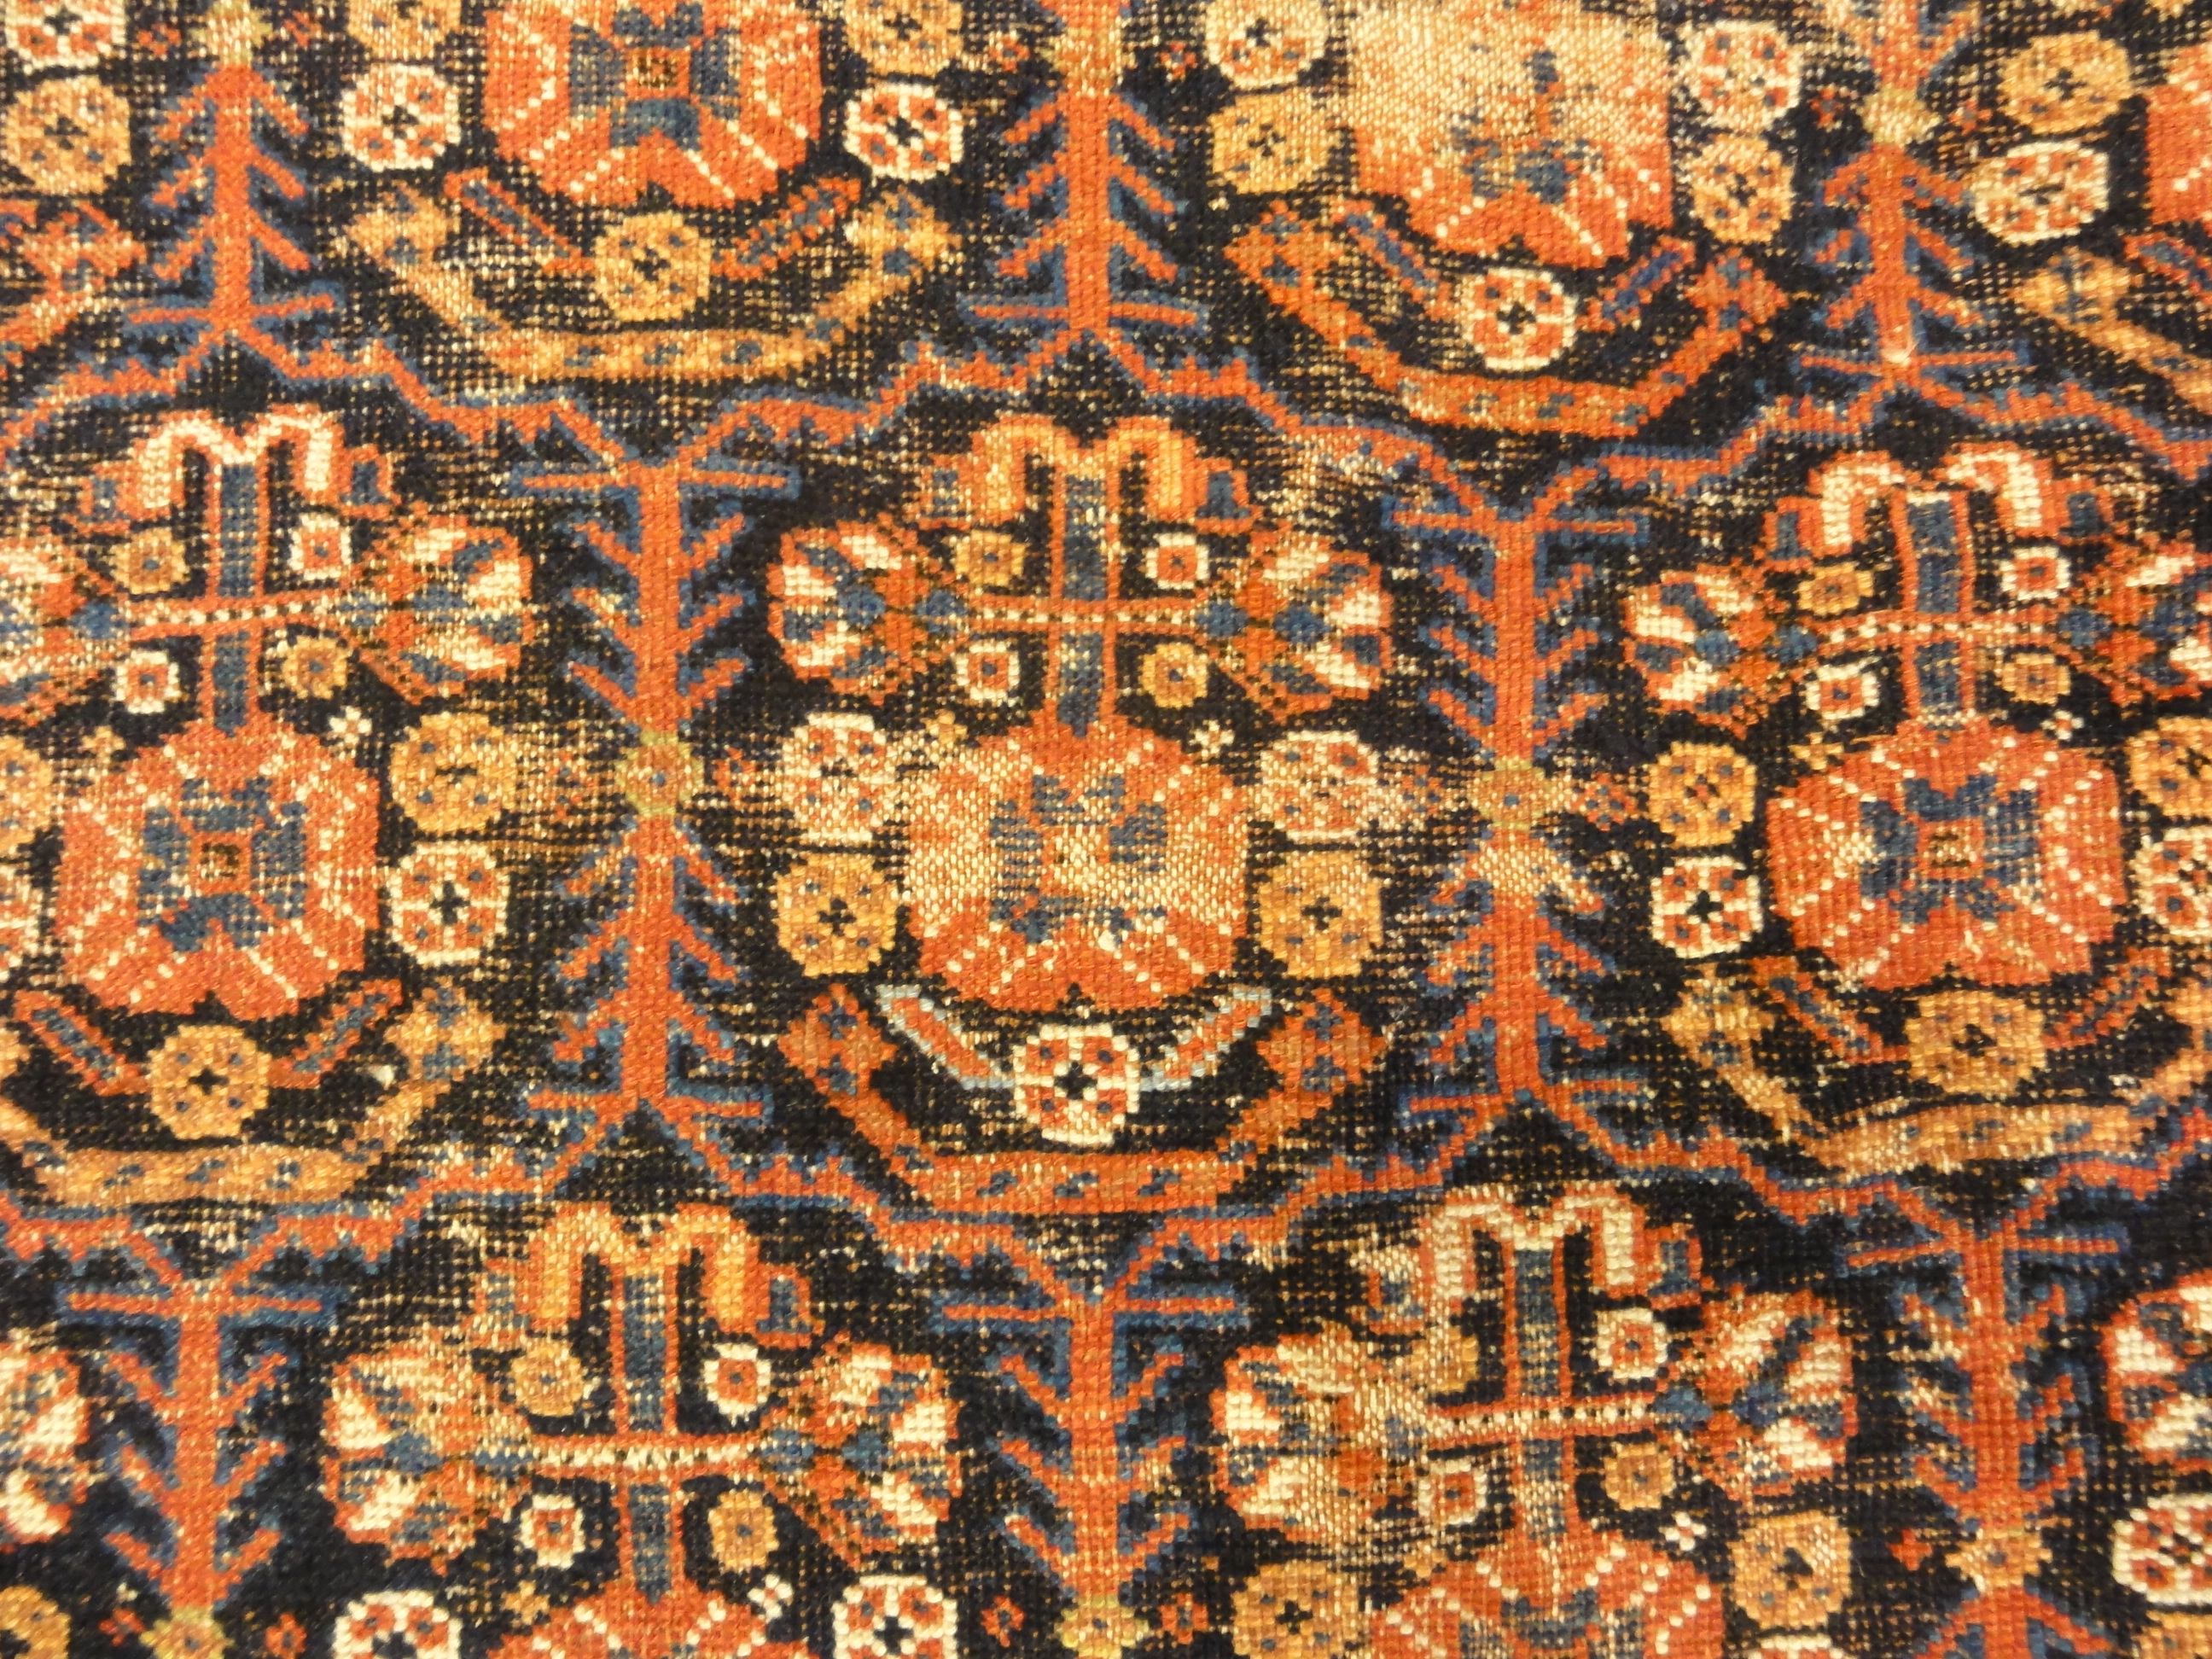 Antique Handwoven Persian Afshar Botteh. A piece of genuine, intricate woven carpet art sold by Santa Barbara Design Center Rugs and More.